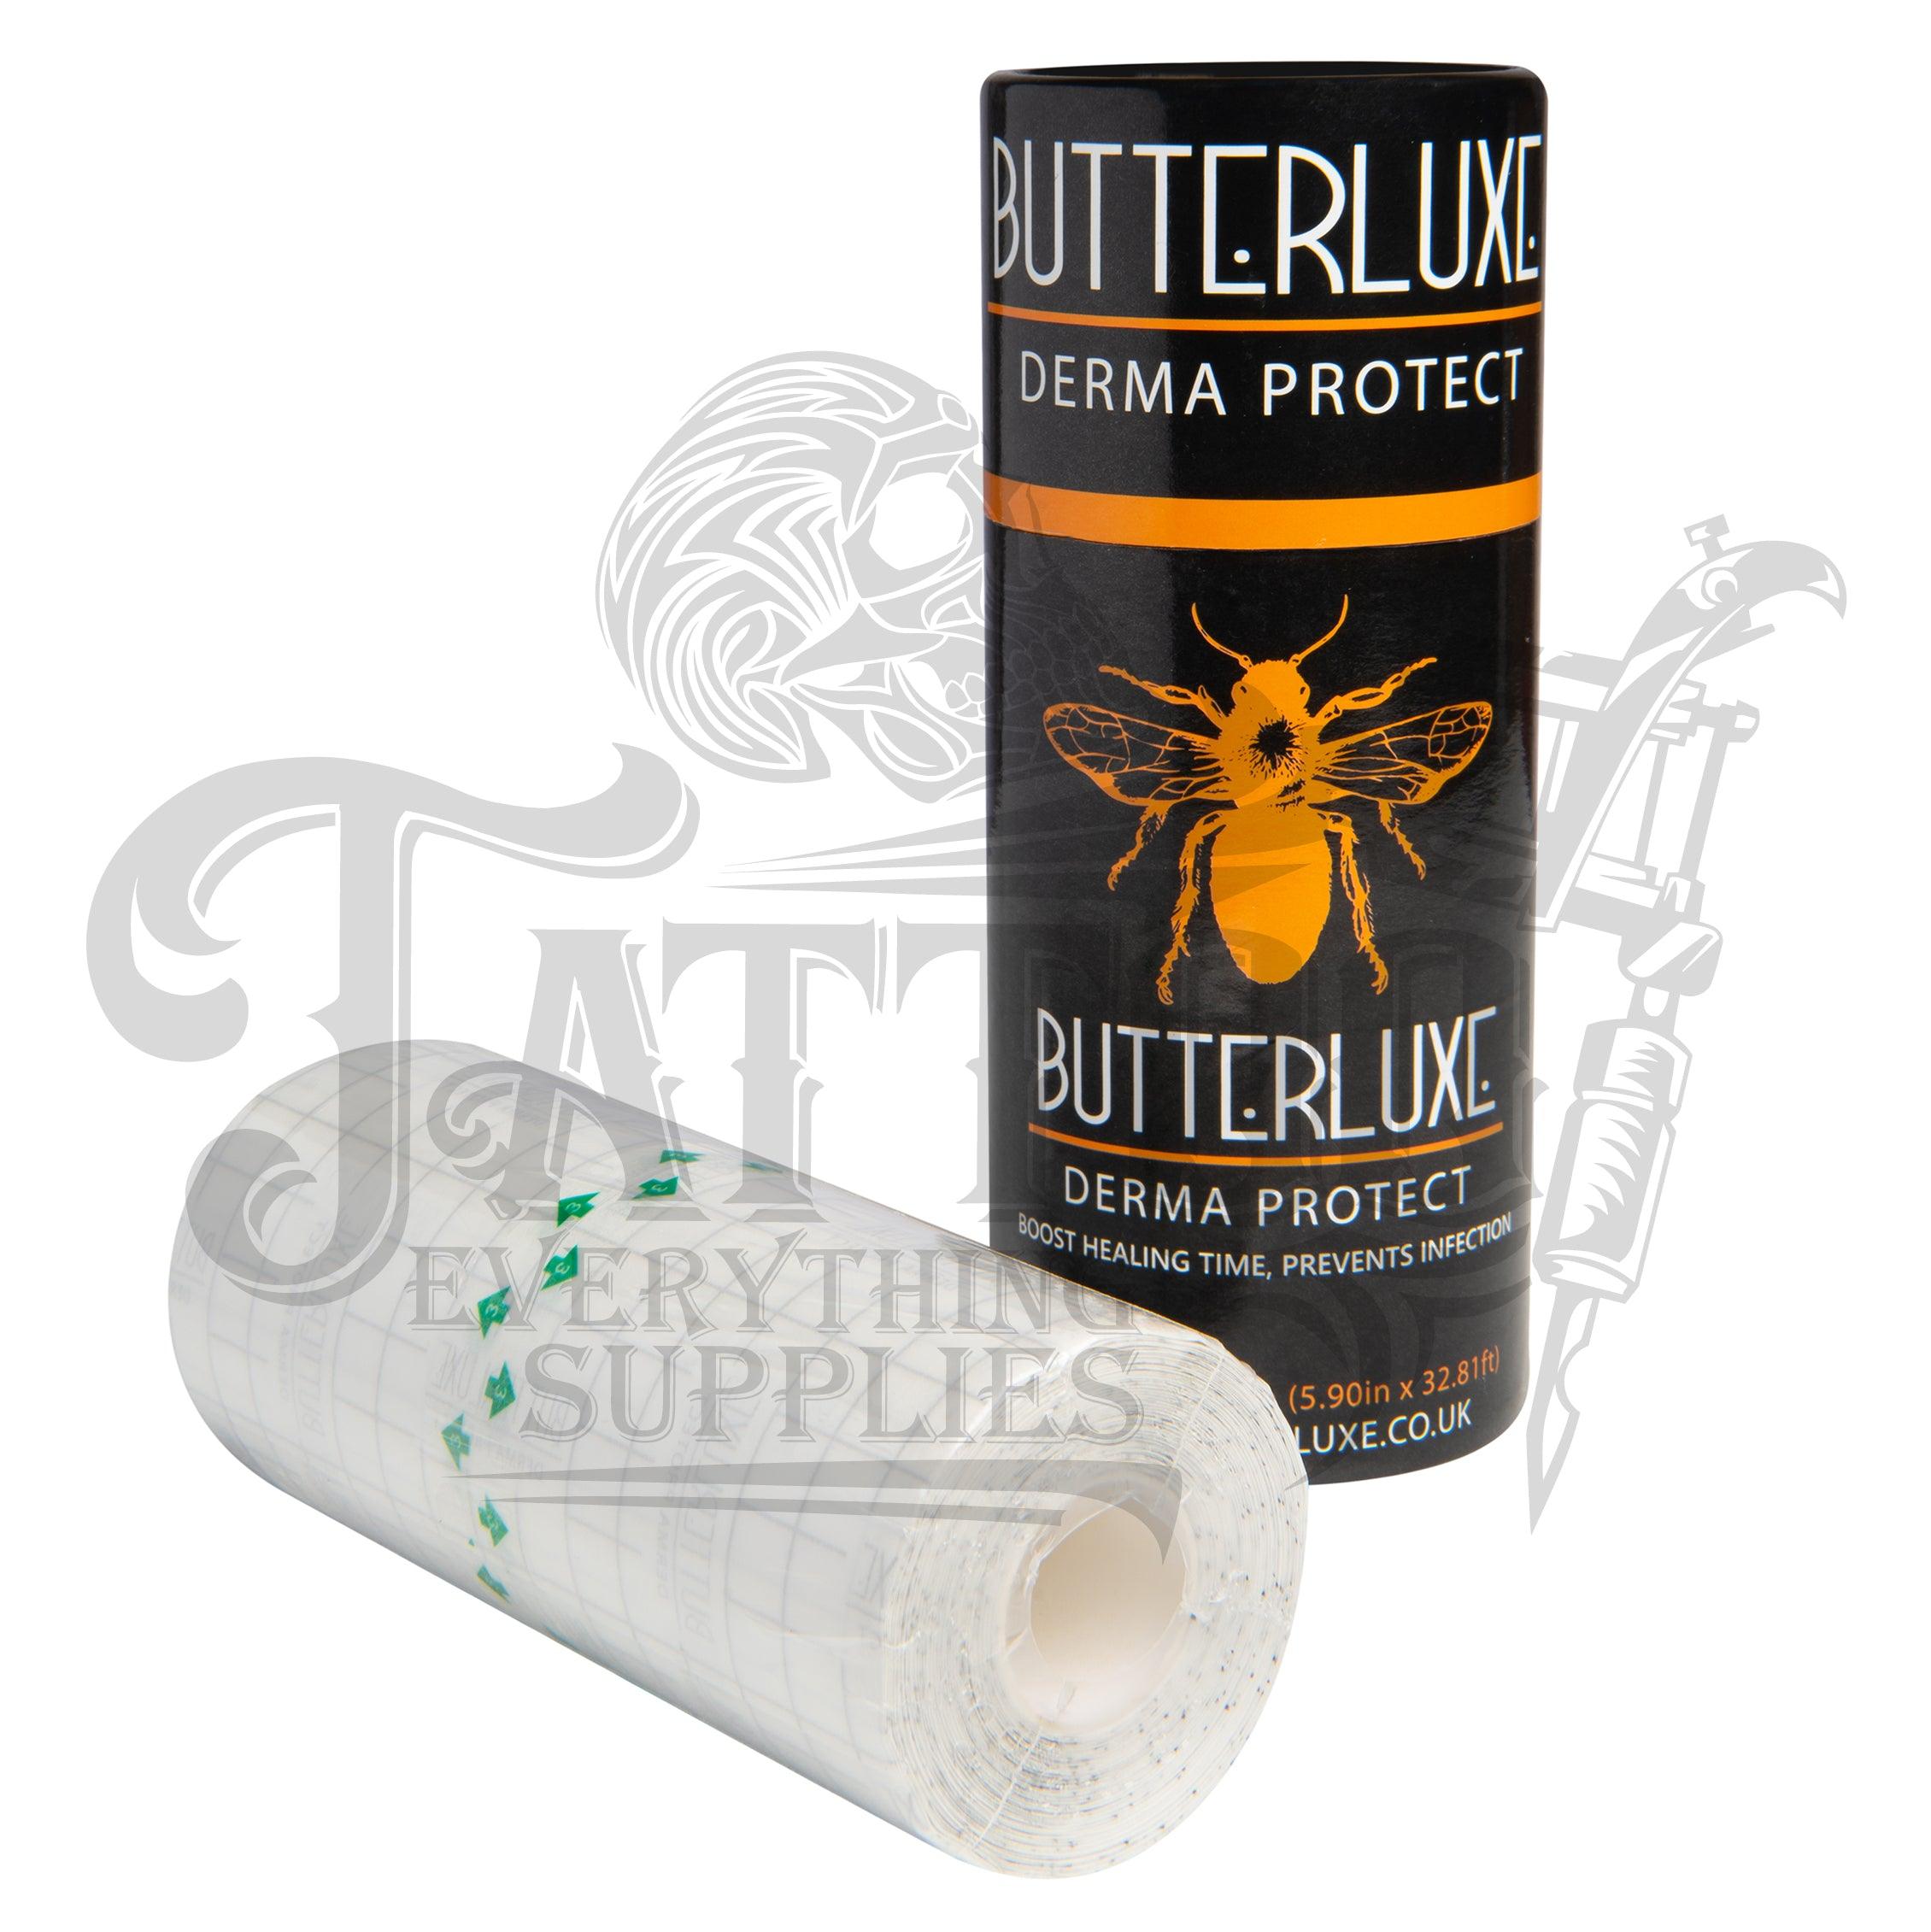 STUDIO – Butterluxe Limited